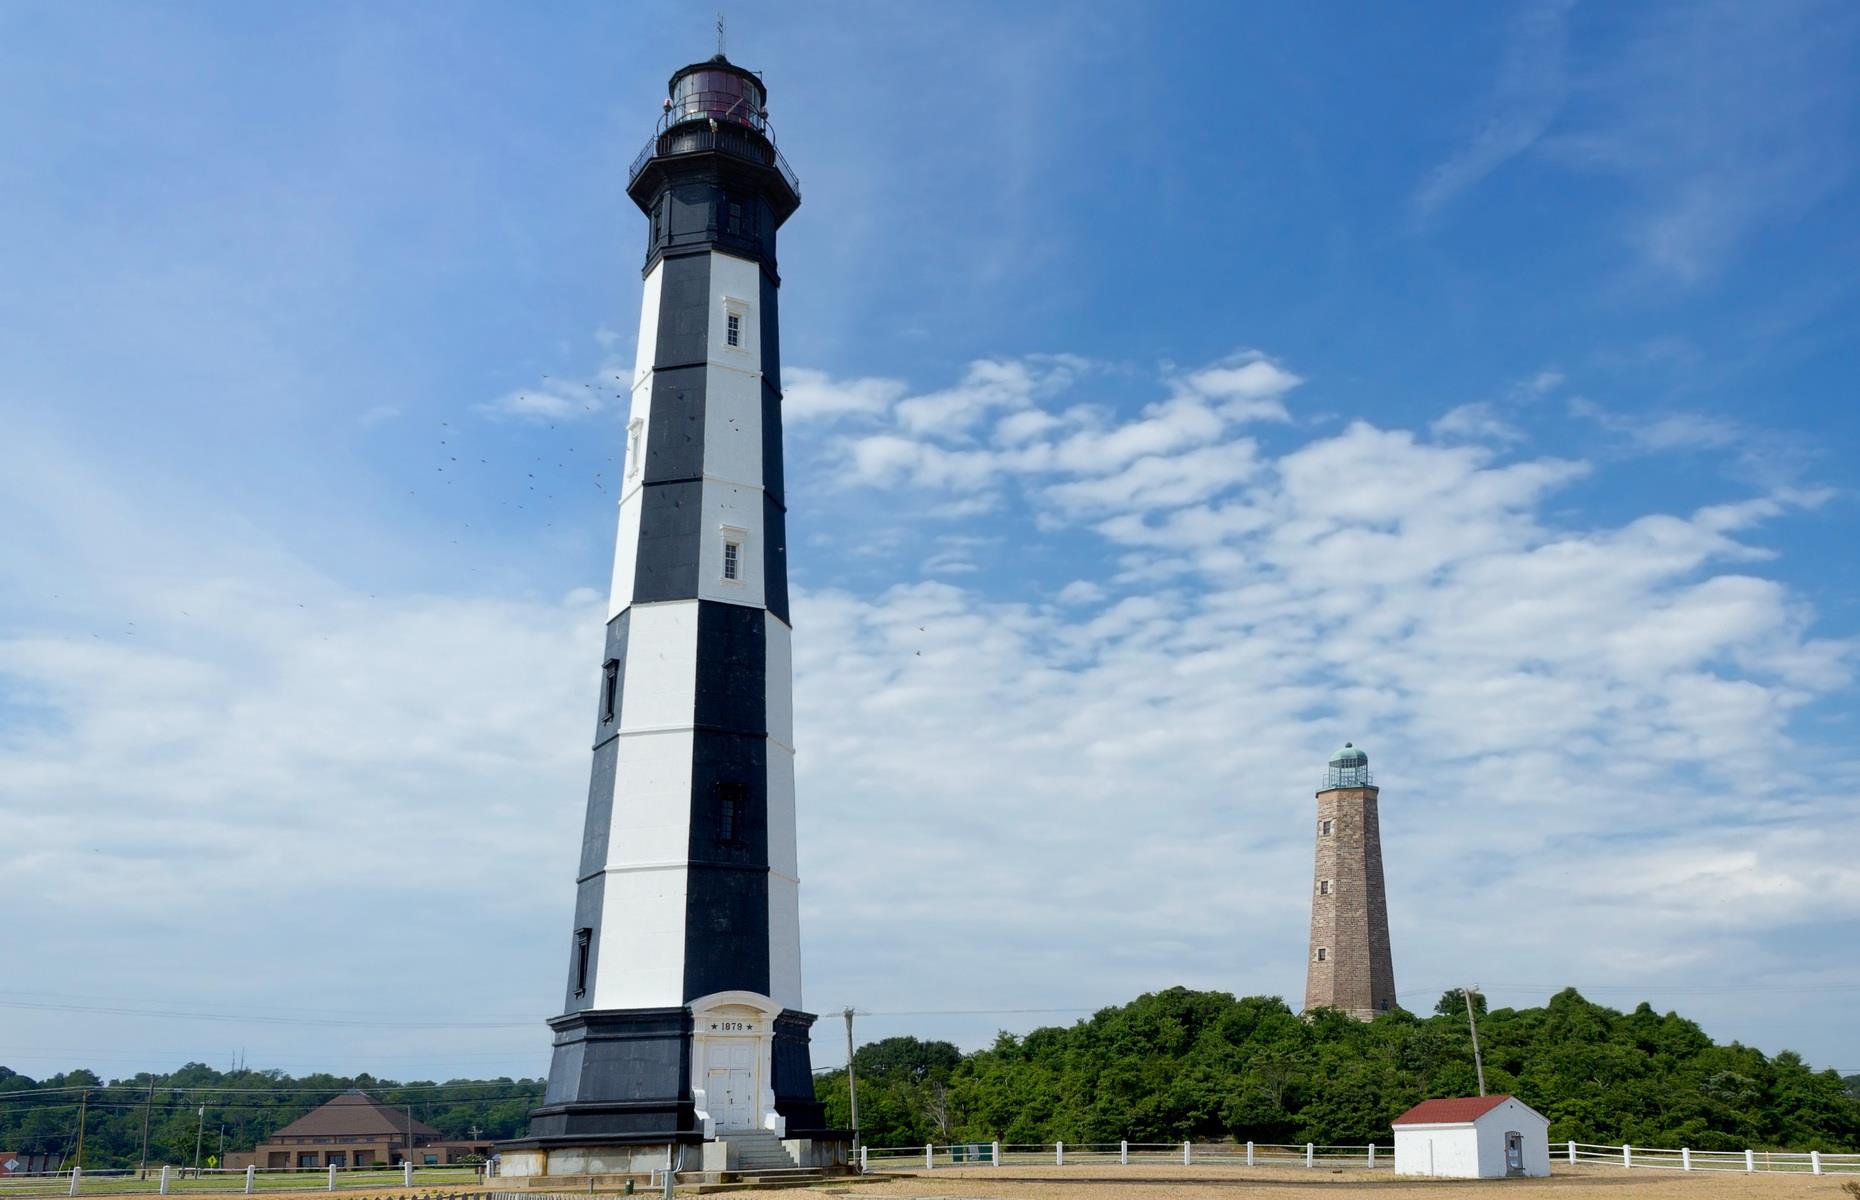 <p>You get two for one at Virginia Beach. The ‘Old’ Cape Henry Lighthouse, pictured right, opened in 1792, and was the first federally funded public construction project by the newly formed US Government. It's near the ‘First Landing’ site where English settlers arrived. The black-and-white ‘New’ Cape Henry Lighthouse was built in 1881 and stands just 350 feet (107m) away from the original.</p>